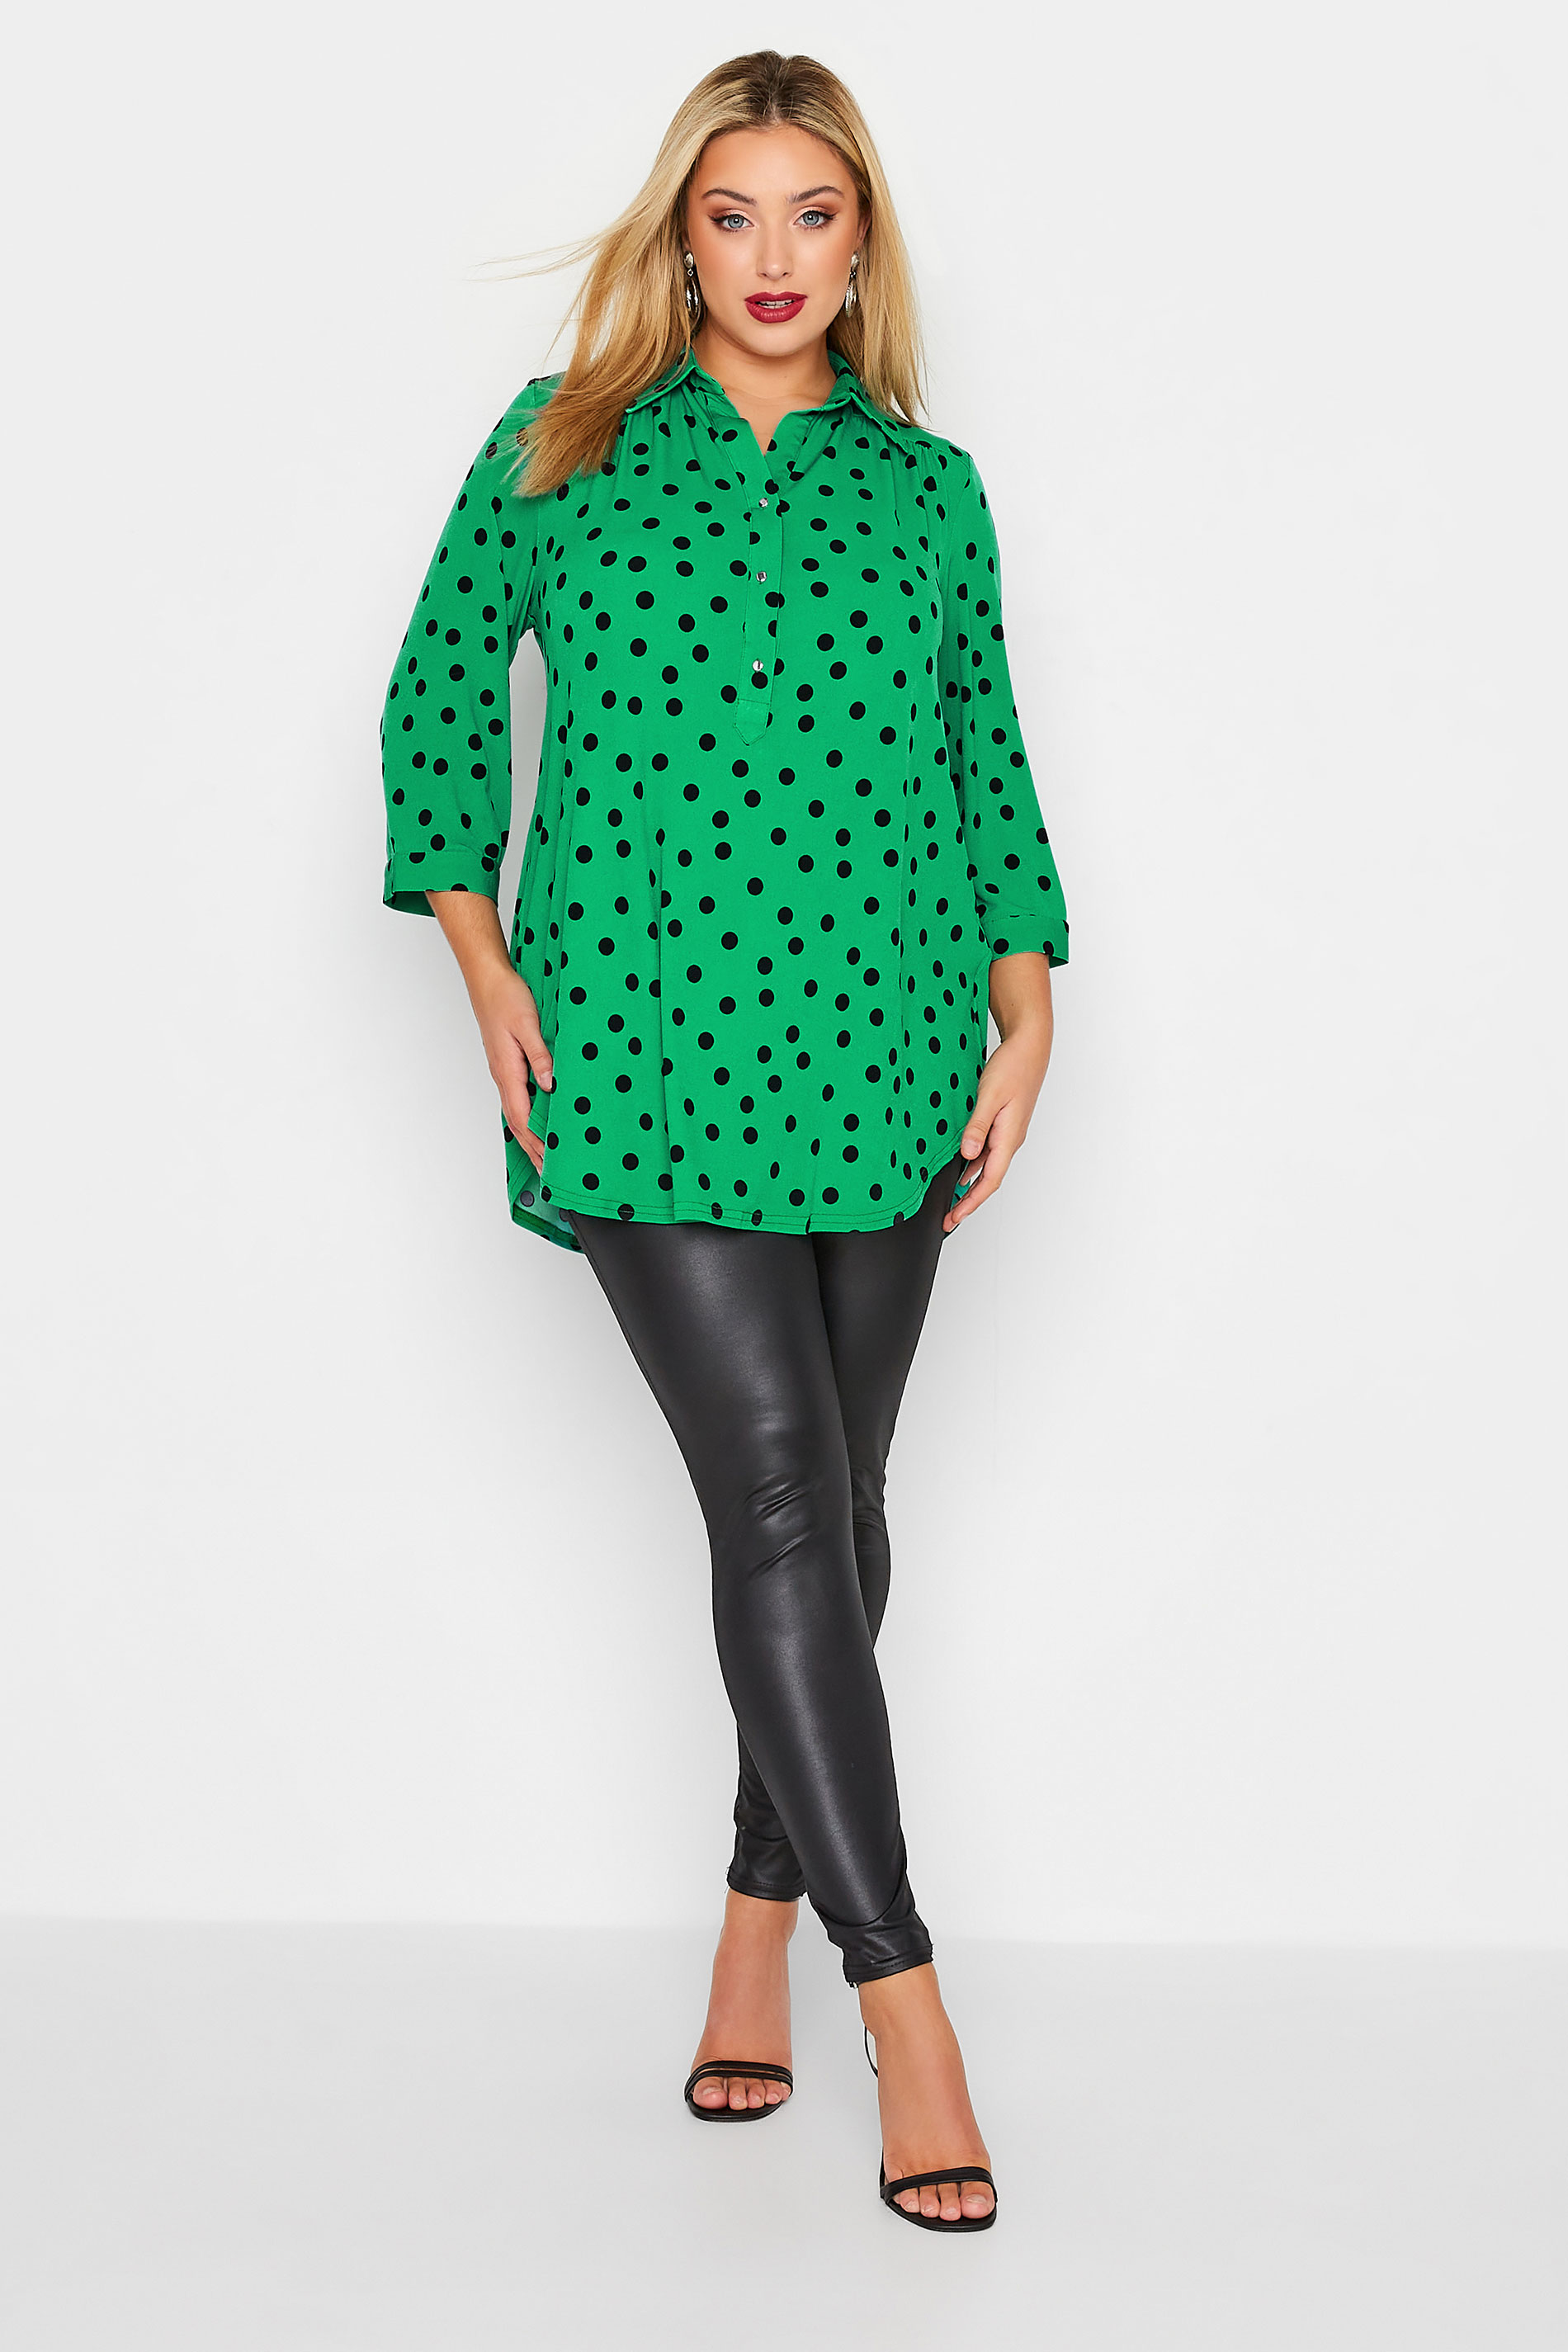 YOURS LONDON Plus Size Green Polka Dot Print Shirt | Yours Clothing 2